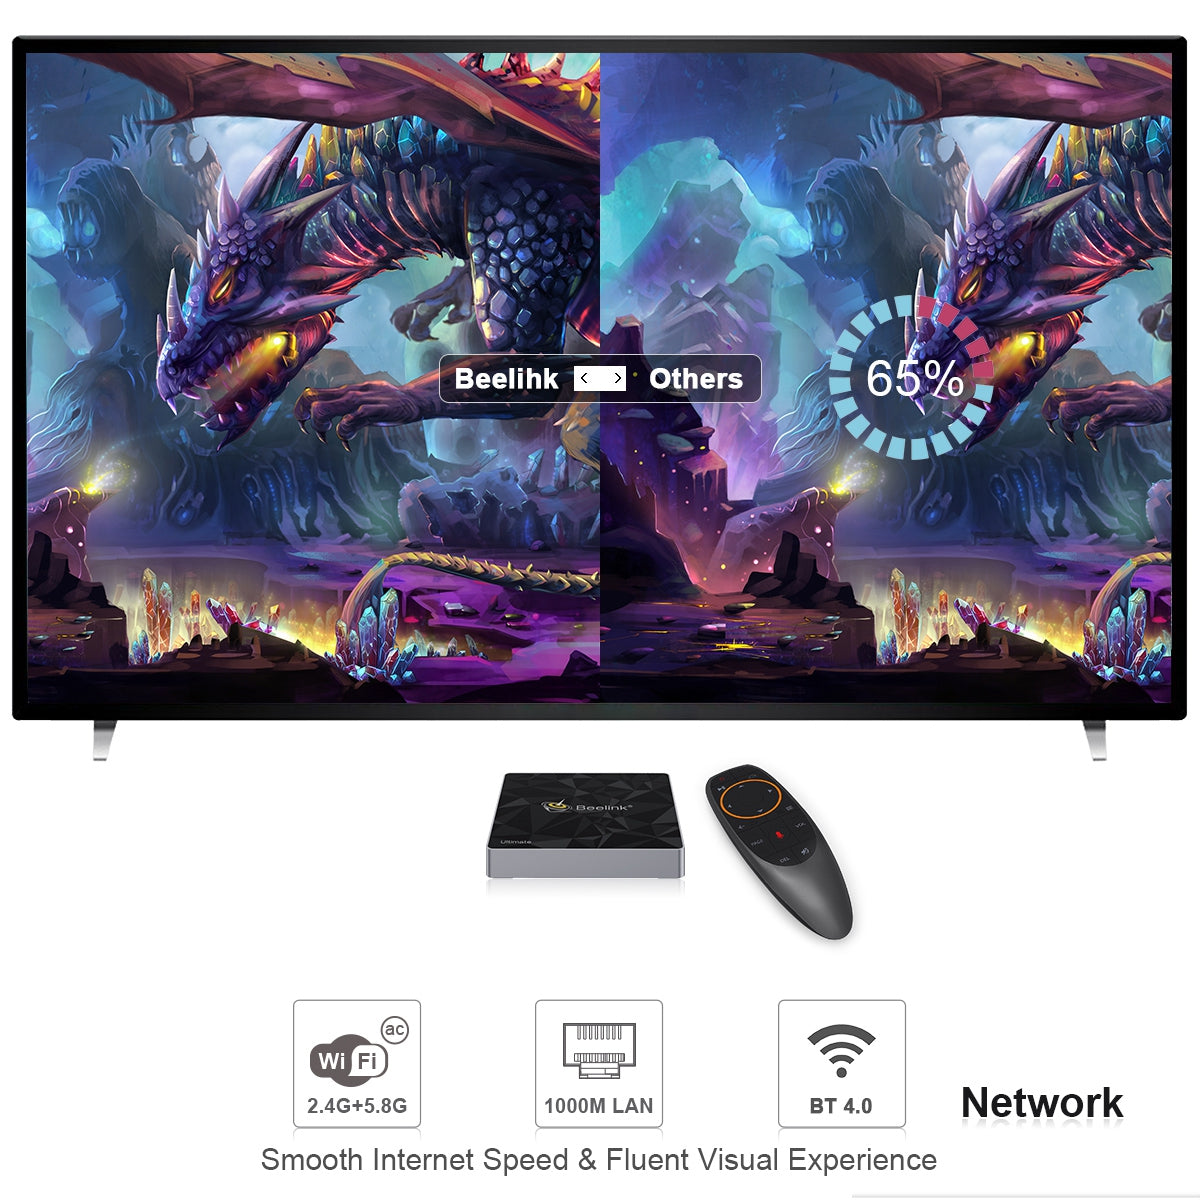 Beelink GT1 - A Android 7.1 S912 Octa Core 3GB + 32GB 2.4GHz / 5.8GHz 1000Mbps BT 4K Smart TV Bo...